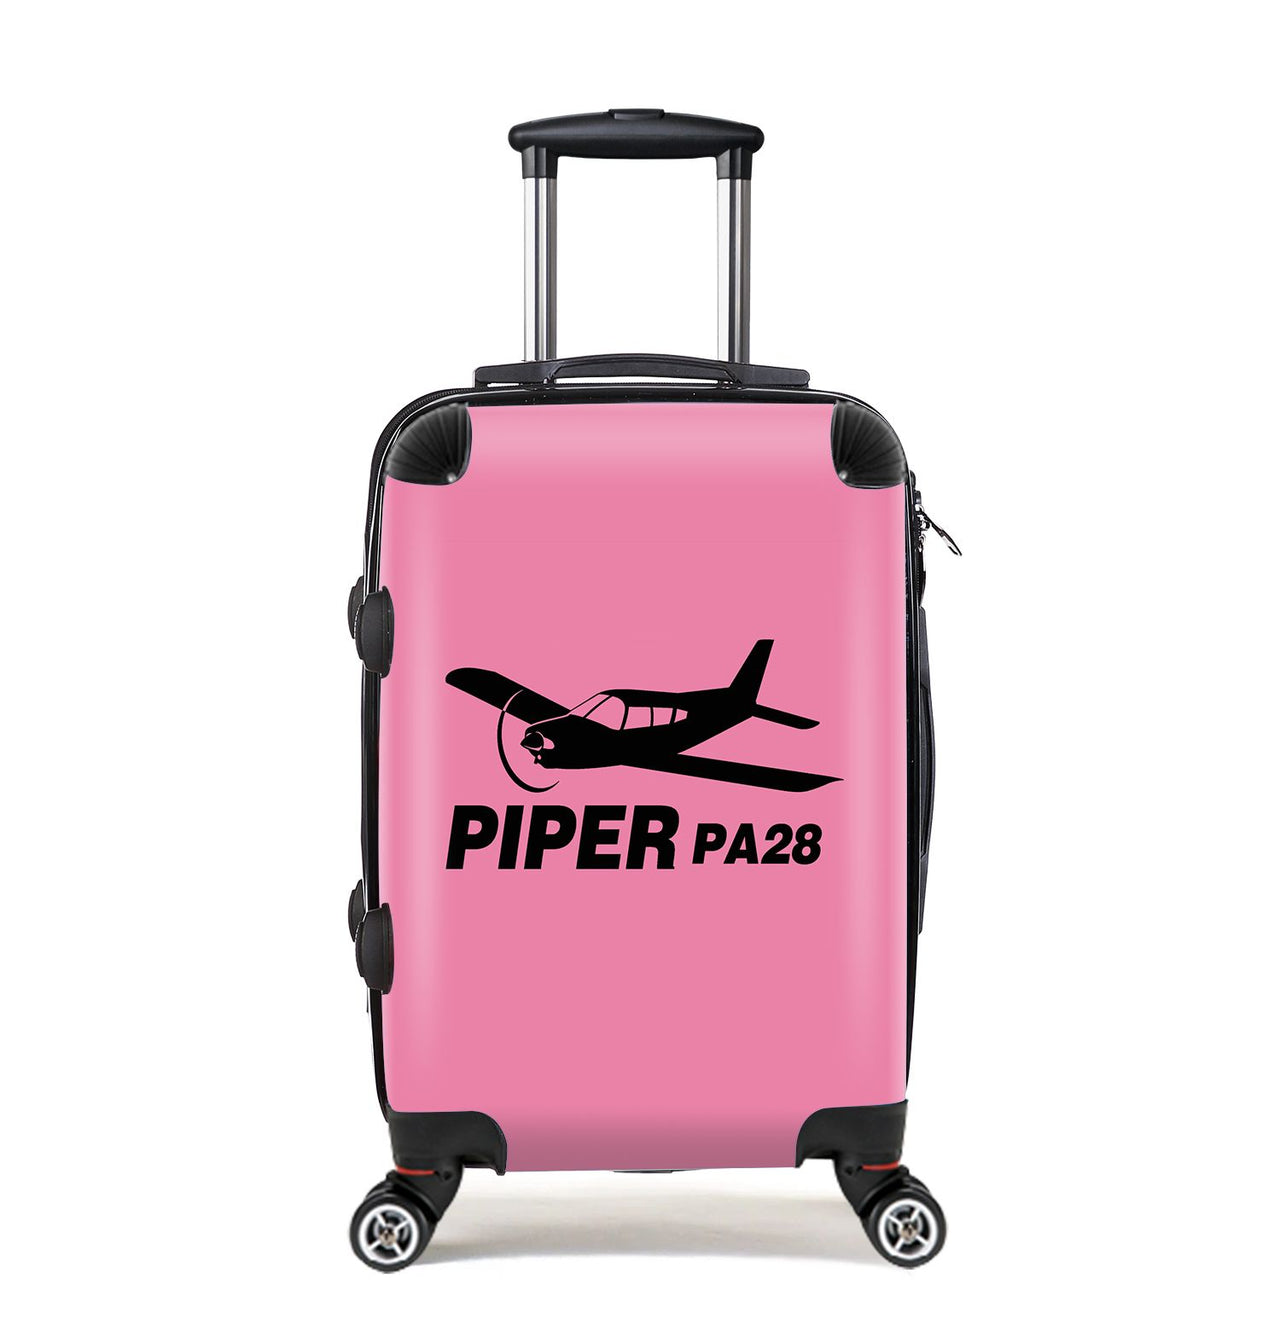 The Piper PA28 Designed Cabin Size Luggages